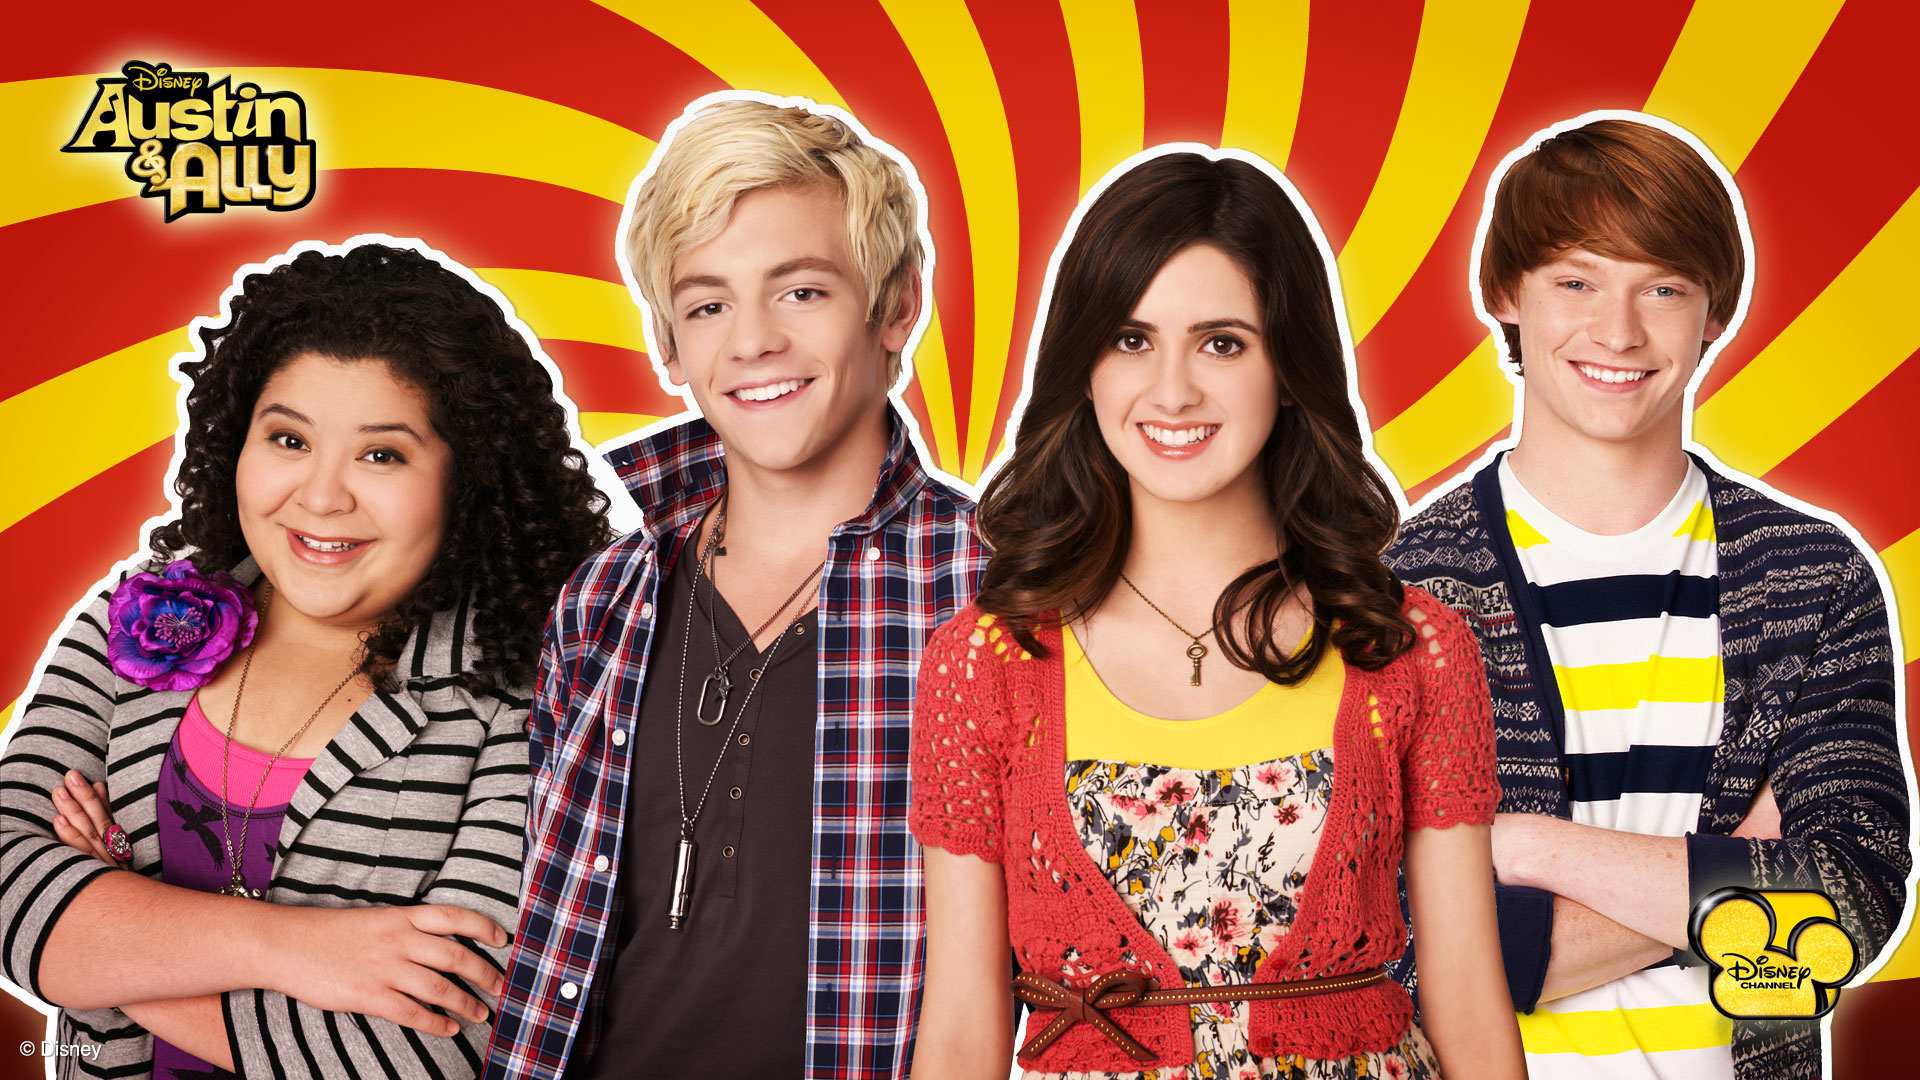 Austin and Ally Pictures & Wallpapers.